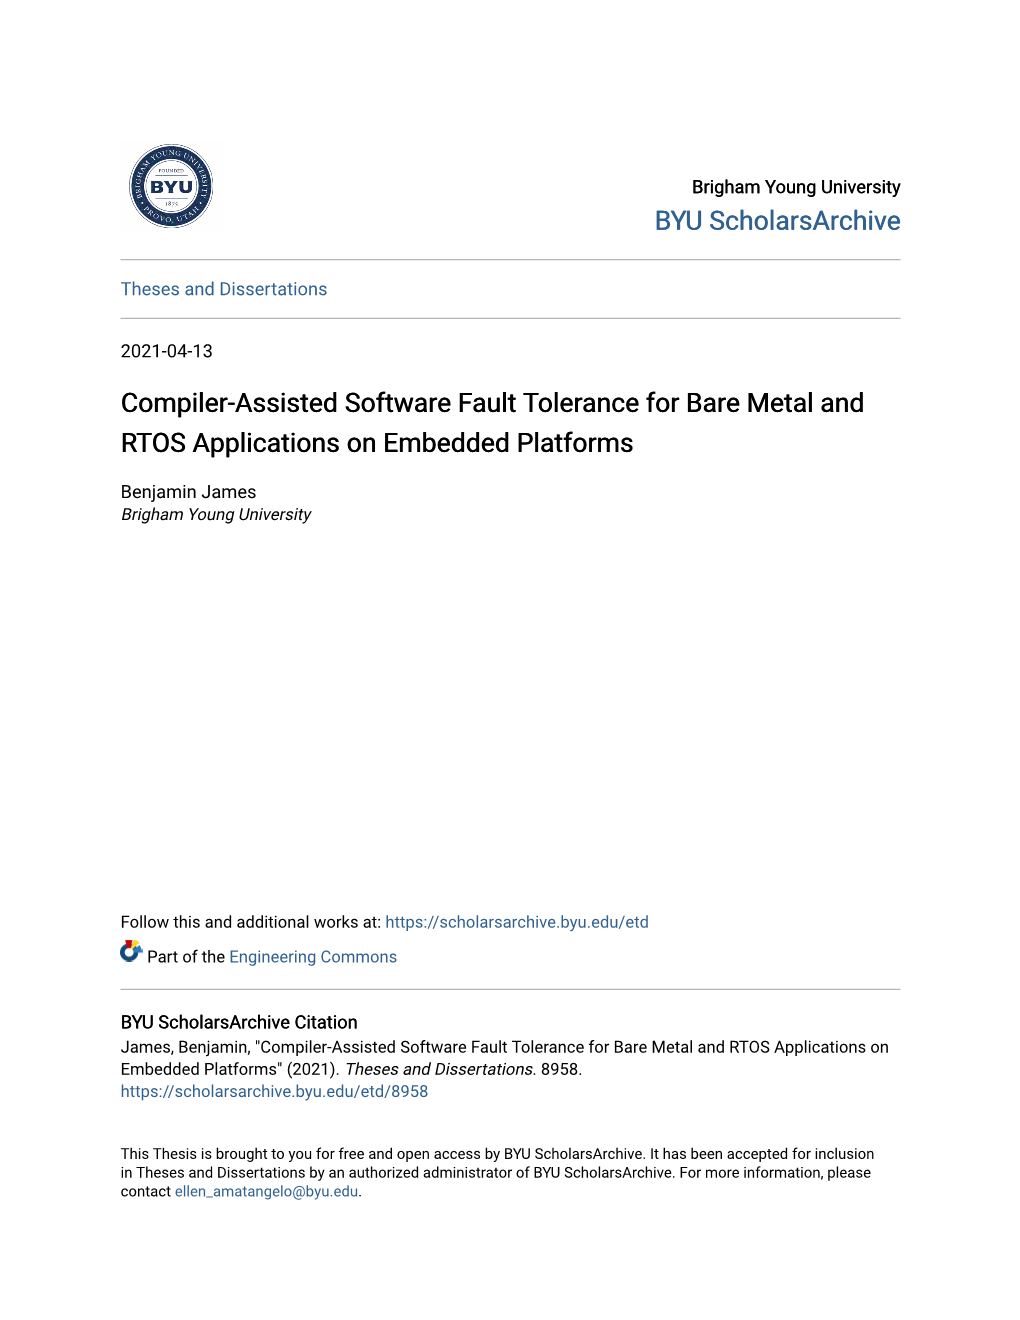 Compiler-Assisted Software Fault Tolerance for Bare Metal and RTOS Applications on Embedded Platforms